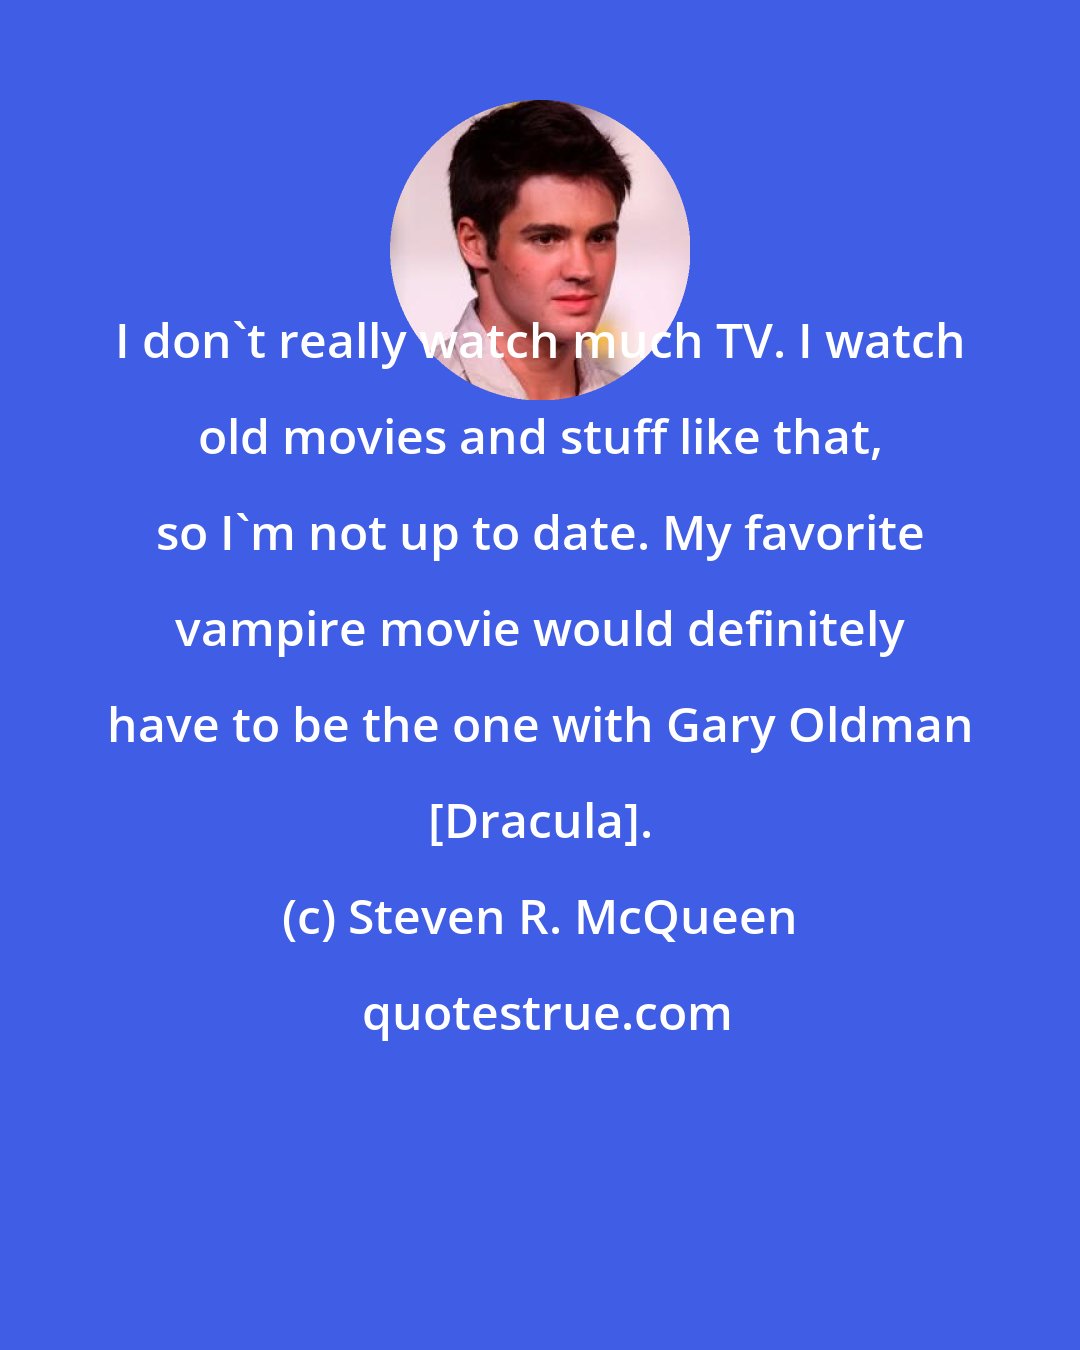 Steven R. McQueen: I don't really watch much TV. I watch old movies and stuff like that, so I'm not up to date. My favorite vampire movie would definitely have to be the one with Gary Oldman [Dracula].